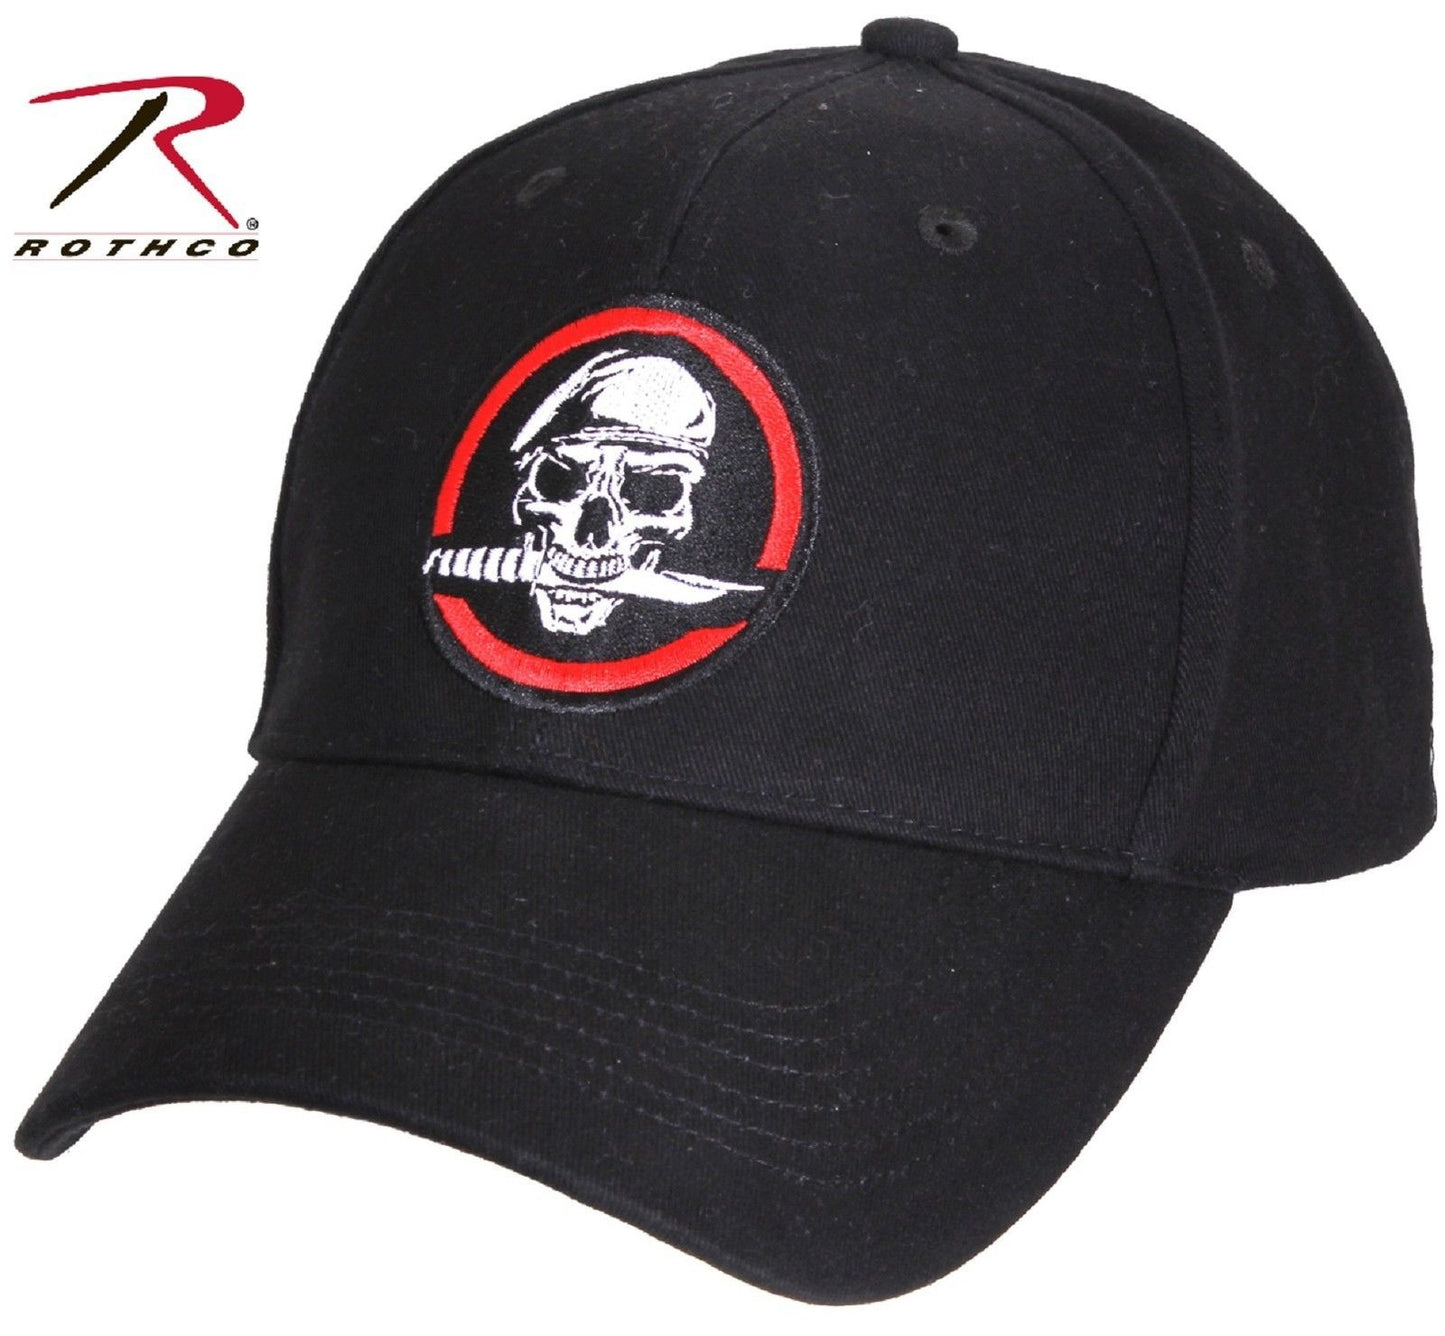 Black Skull & Knife Deluxe Low Profile Hat - Rothco Adjustable Cap